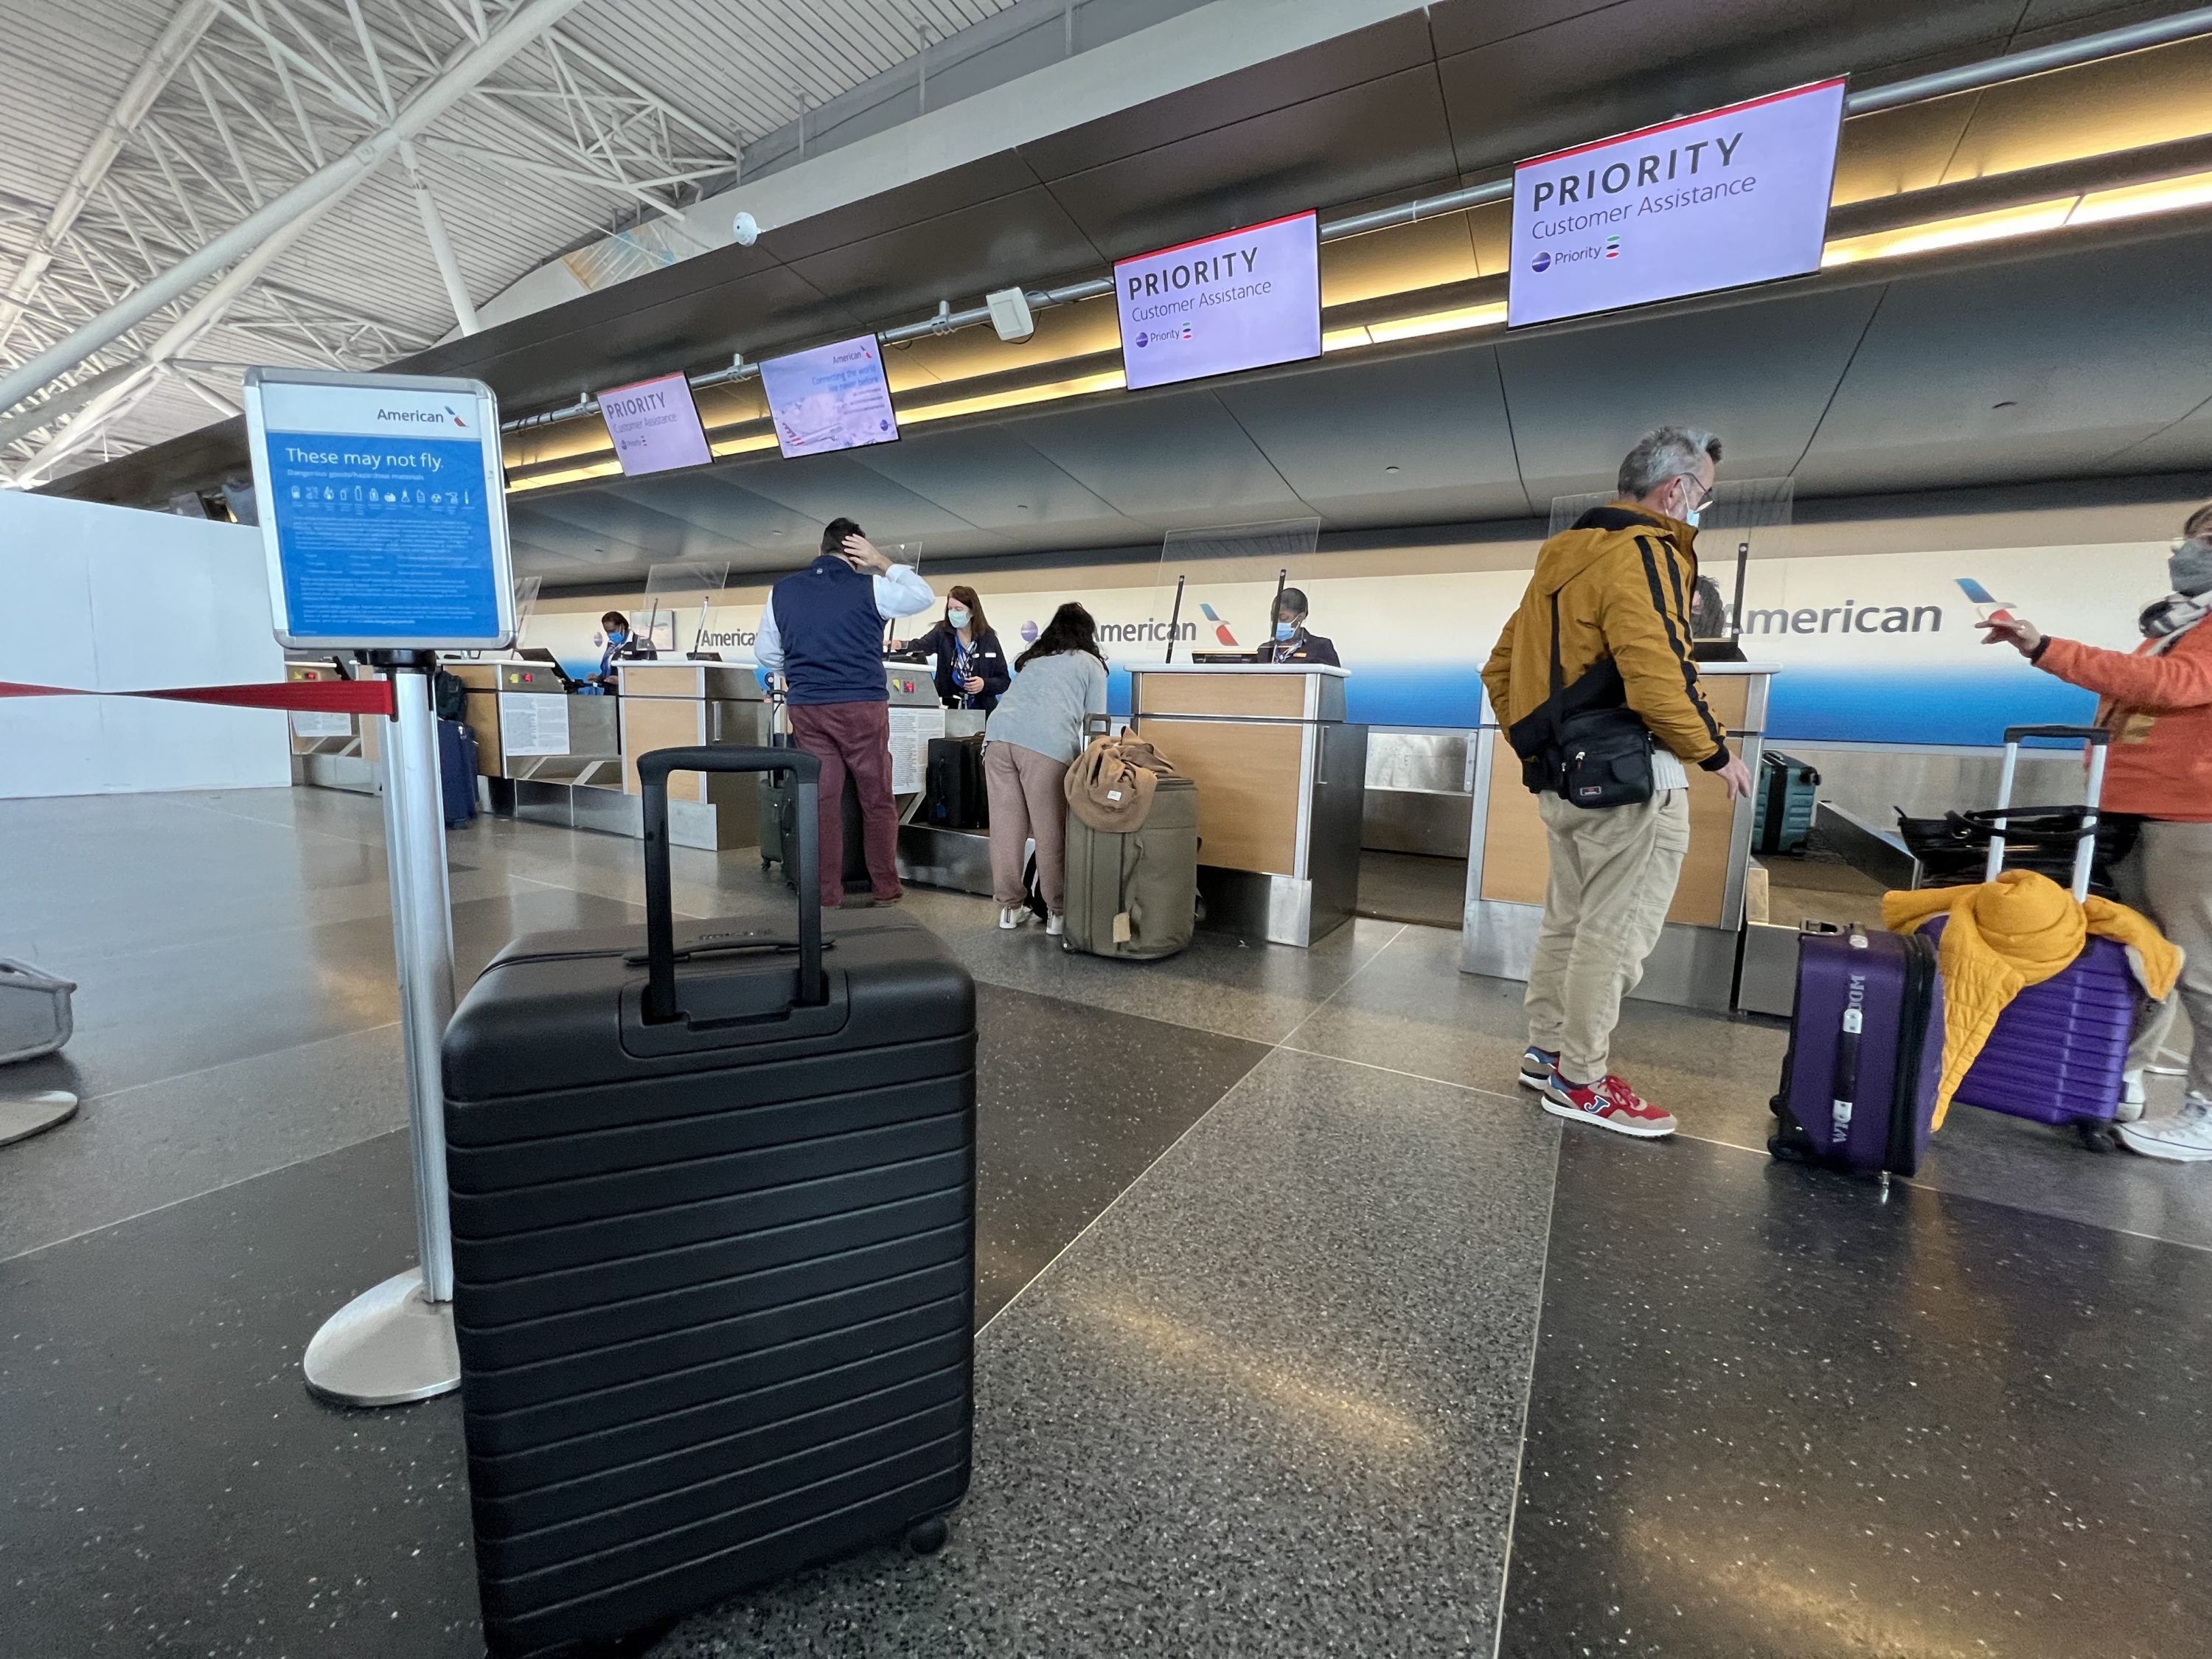 American Airlines Flagship Business JFK check in counters